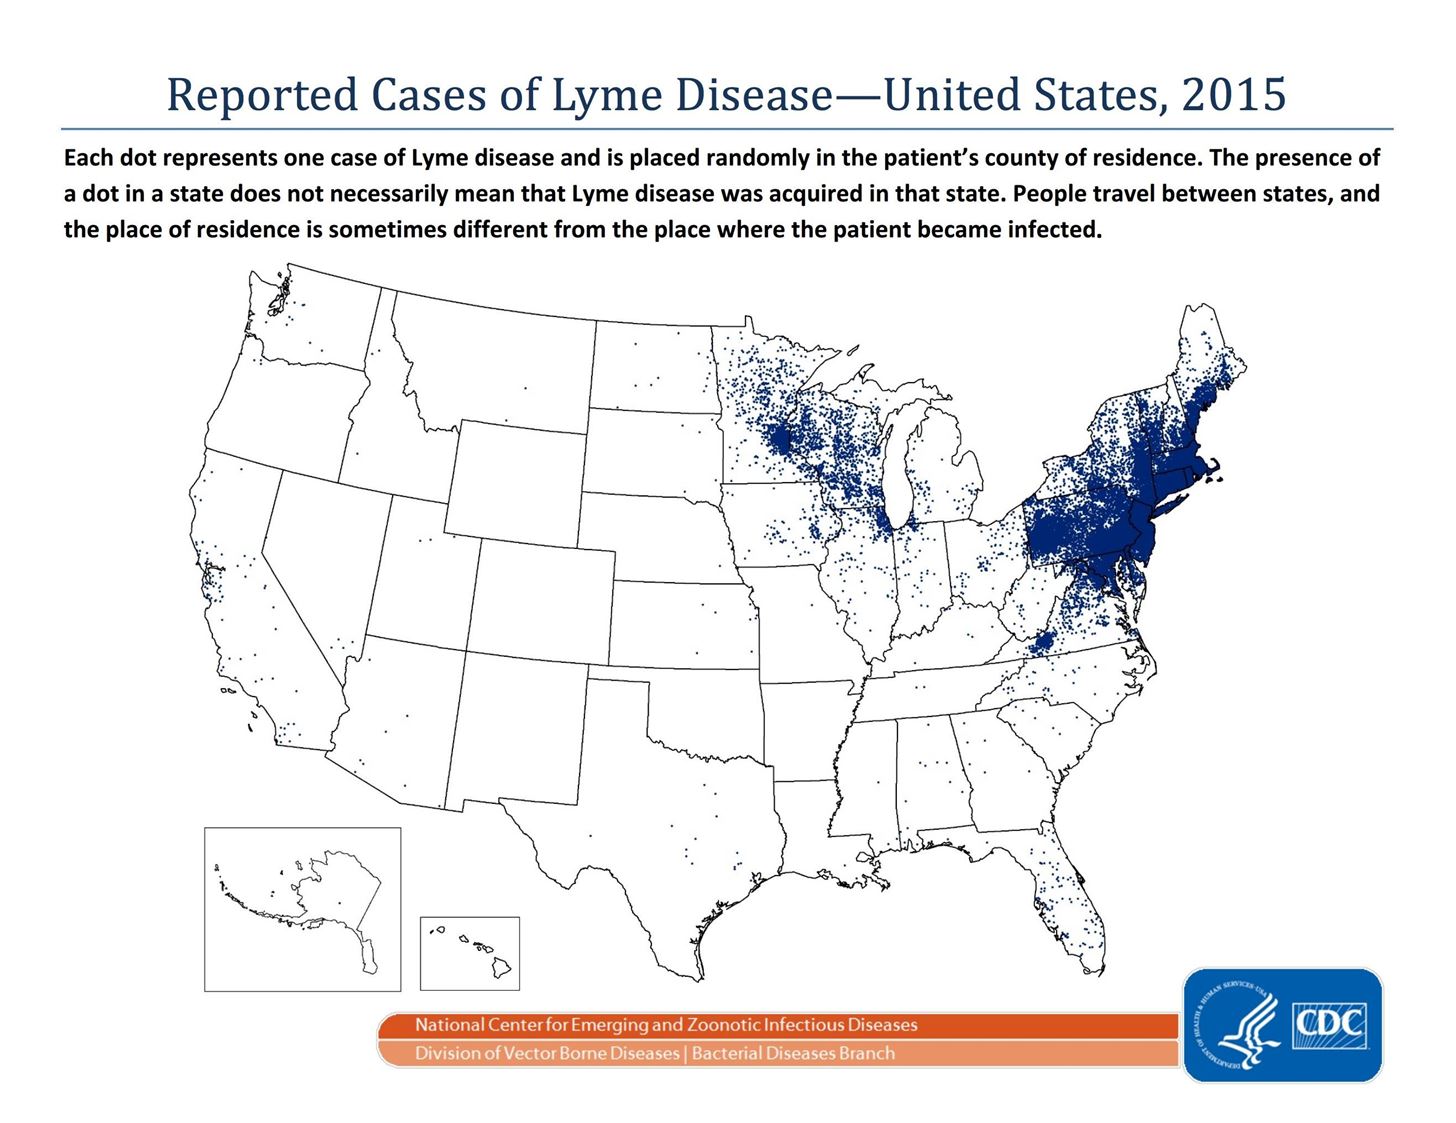 An Early Spring & Skyrocketing Mouse Population Converge for a Risky 2017 for Lyme Disease